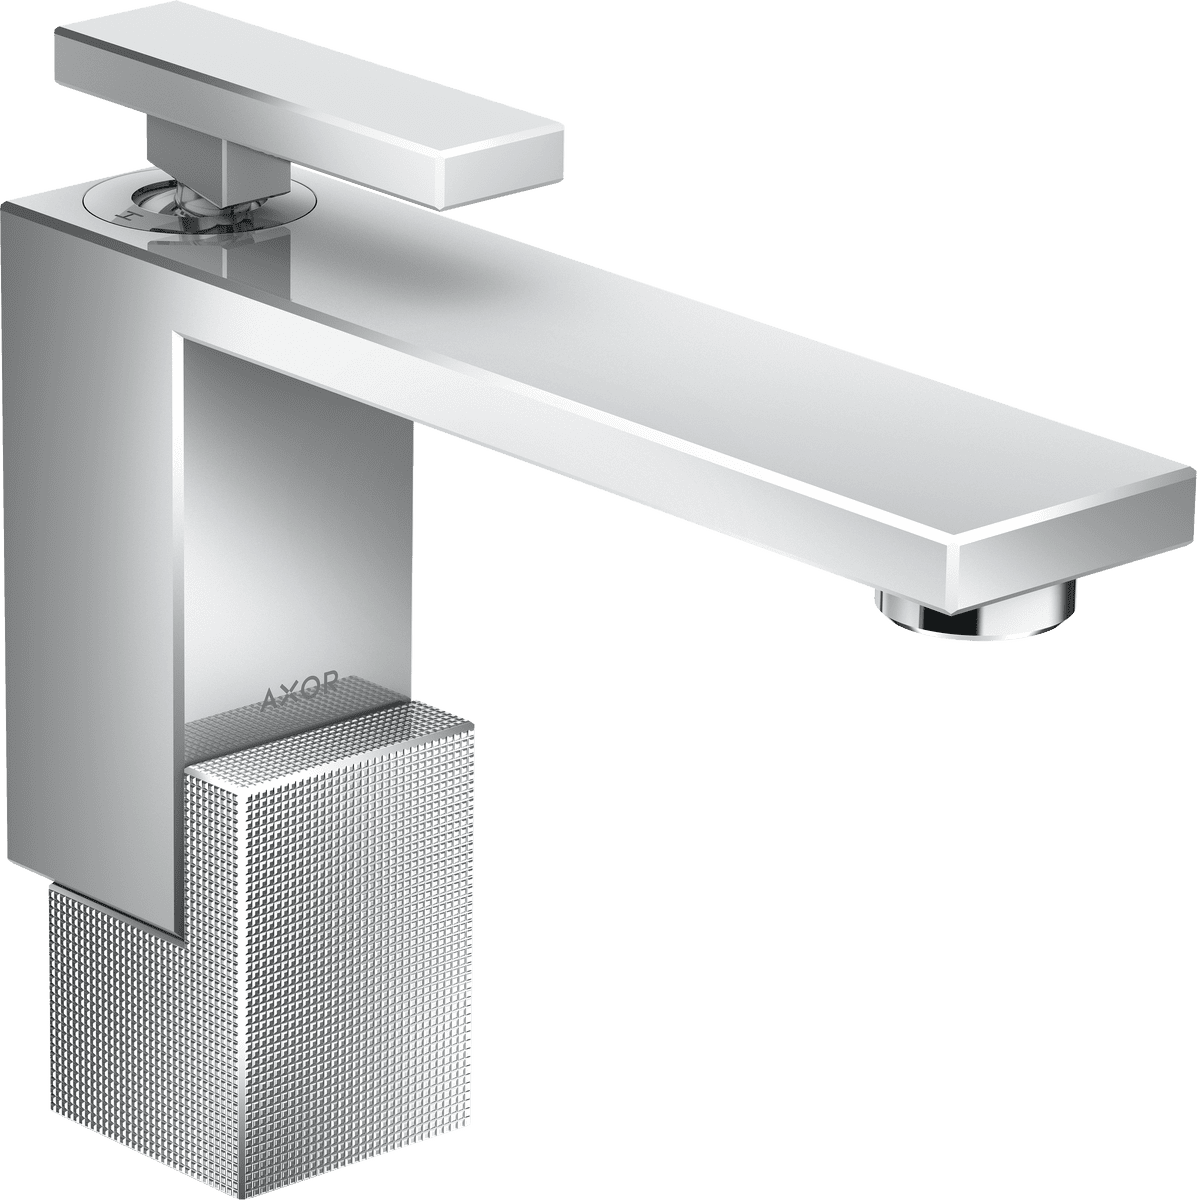 Picture of HANSGROHE AXOR Edge Single lever basin mixer 130 with push-open waste set - diamond cut #46011000 - Chrome